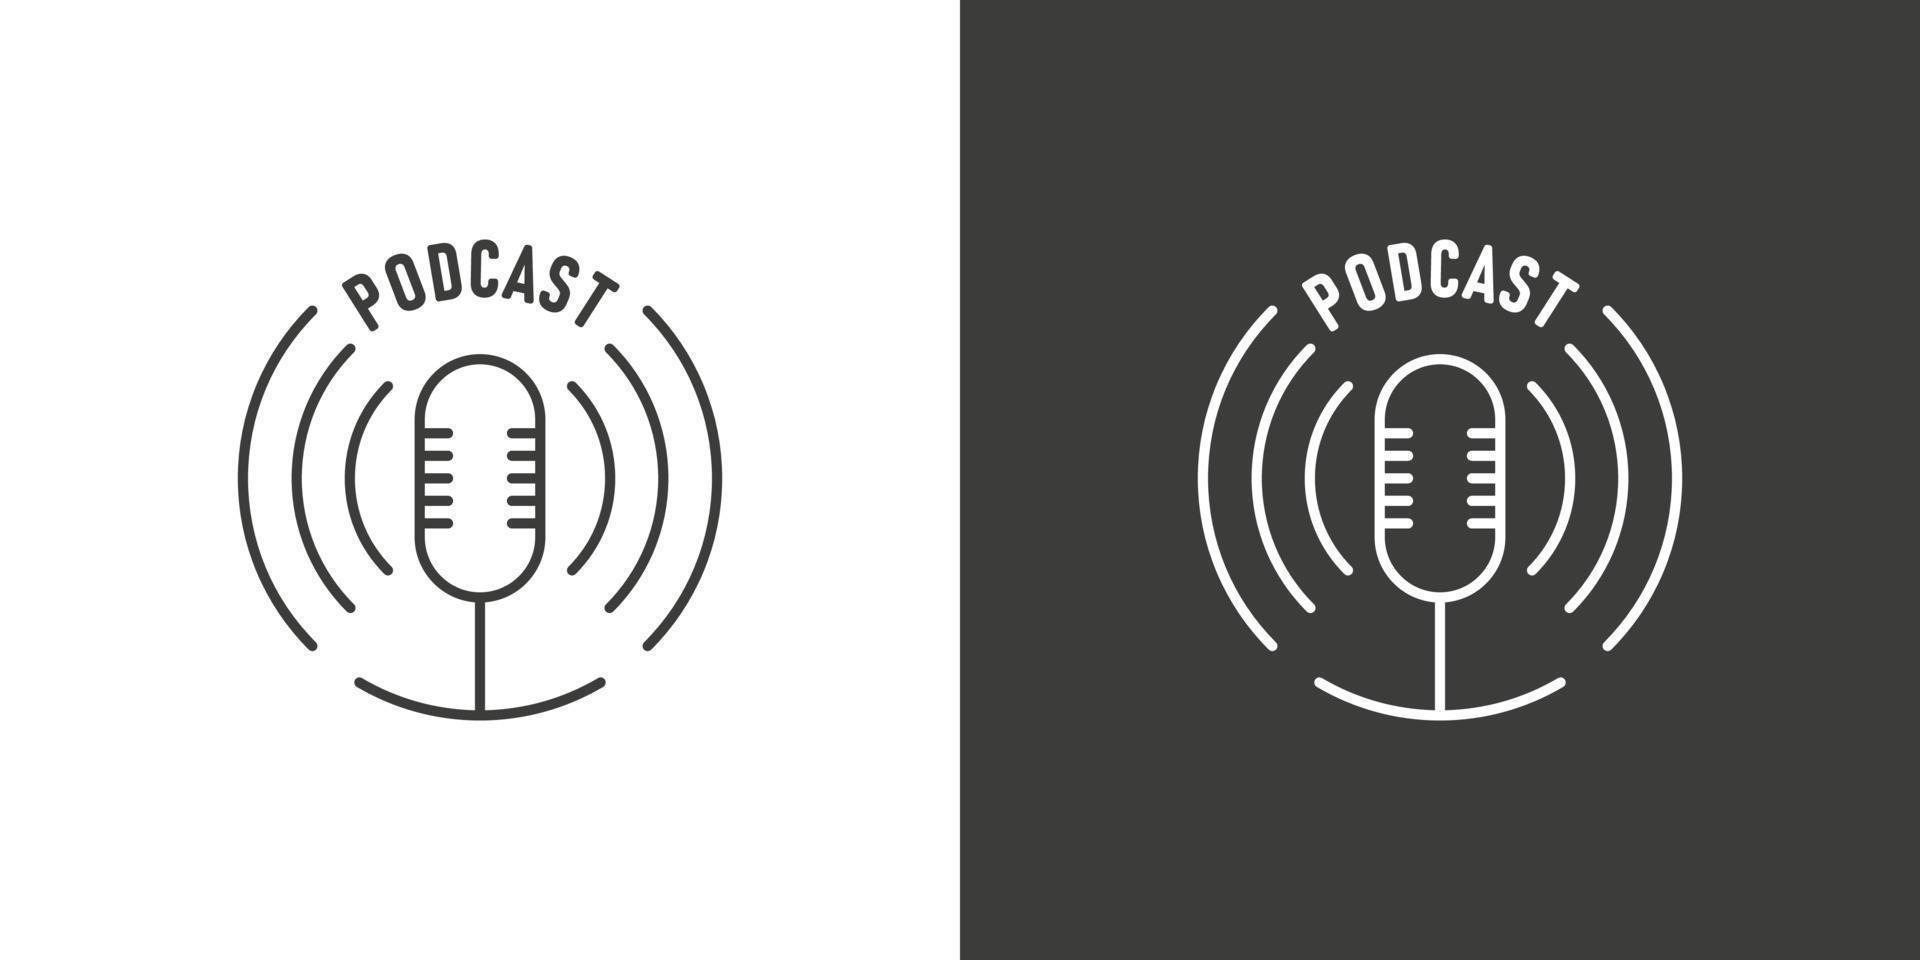 Emblems for broadcast. Podcast logos and symbols, icons with studio microphone. Vector illustration